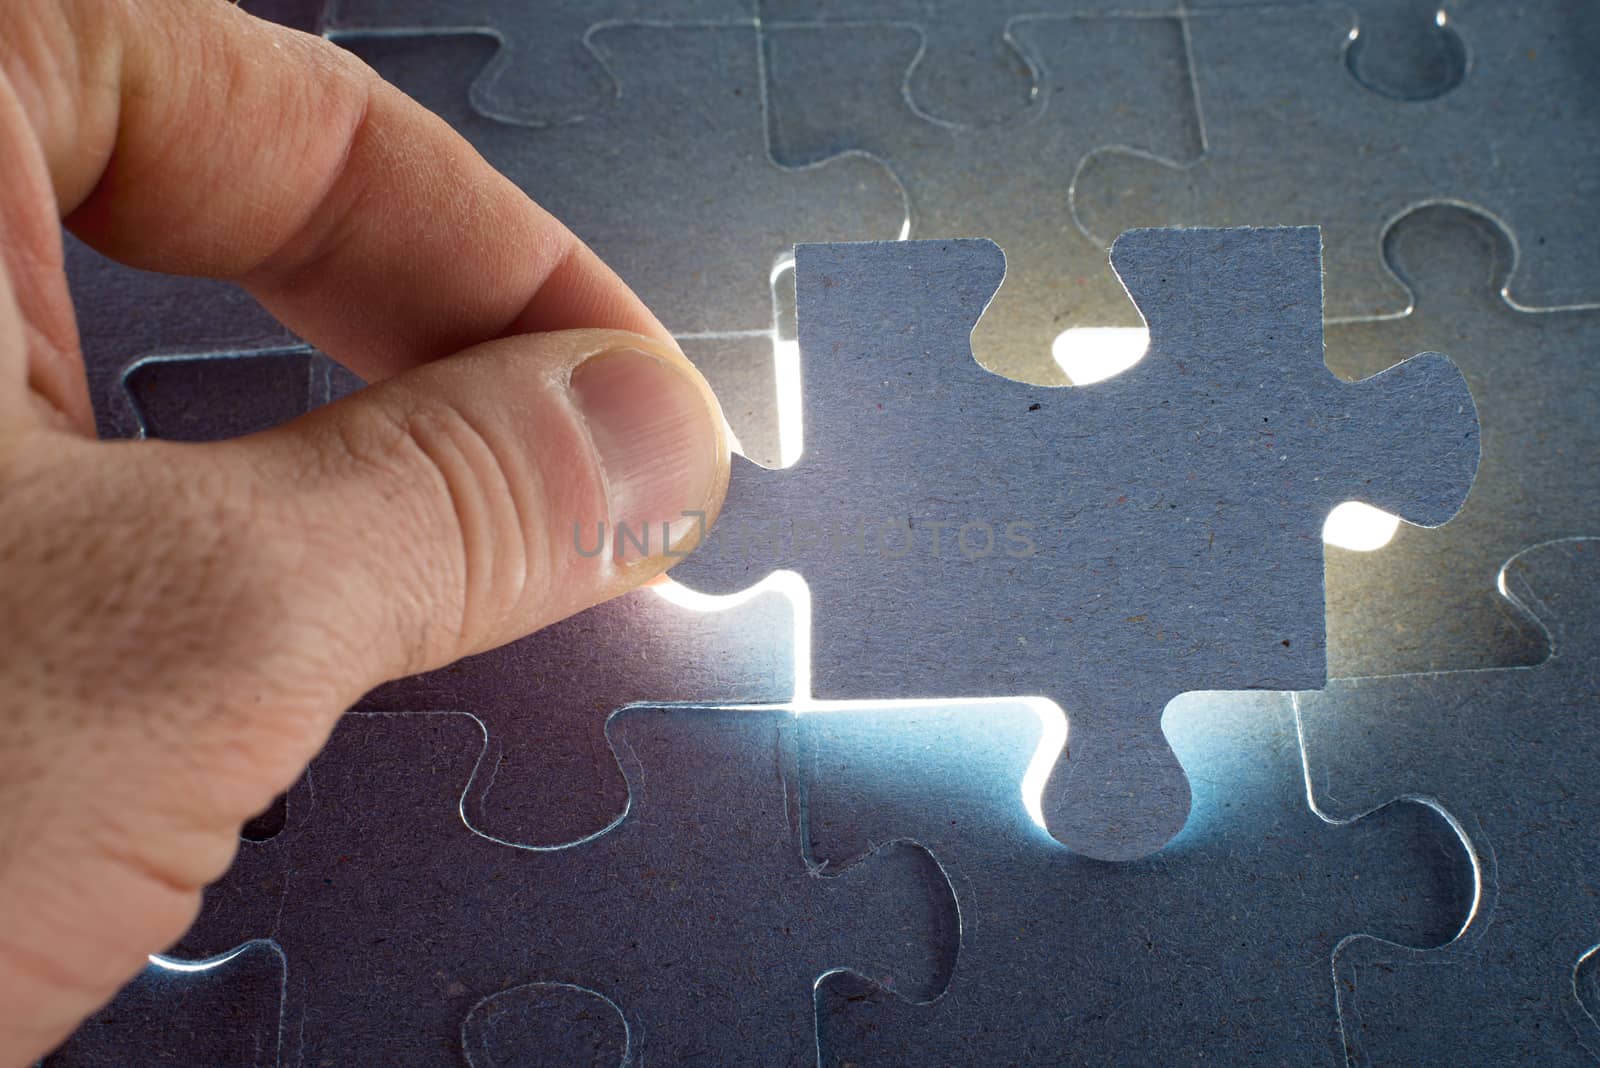 Missing jigsaw puzzle piece with light glow, for completing the final puzzle piece